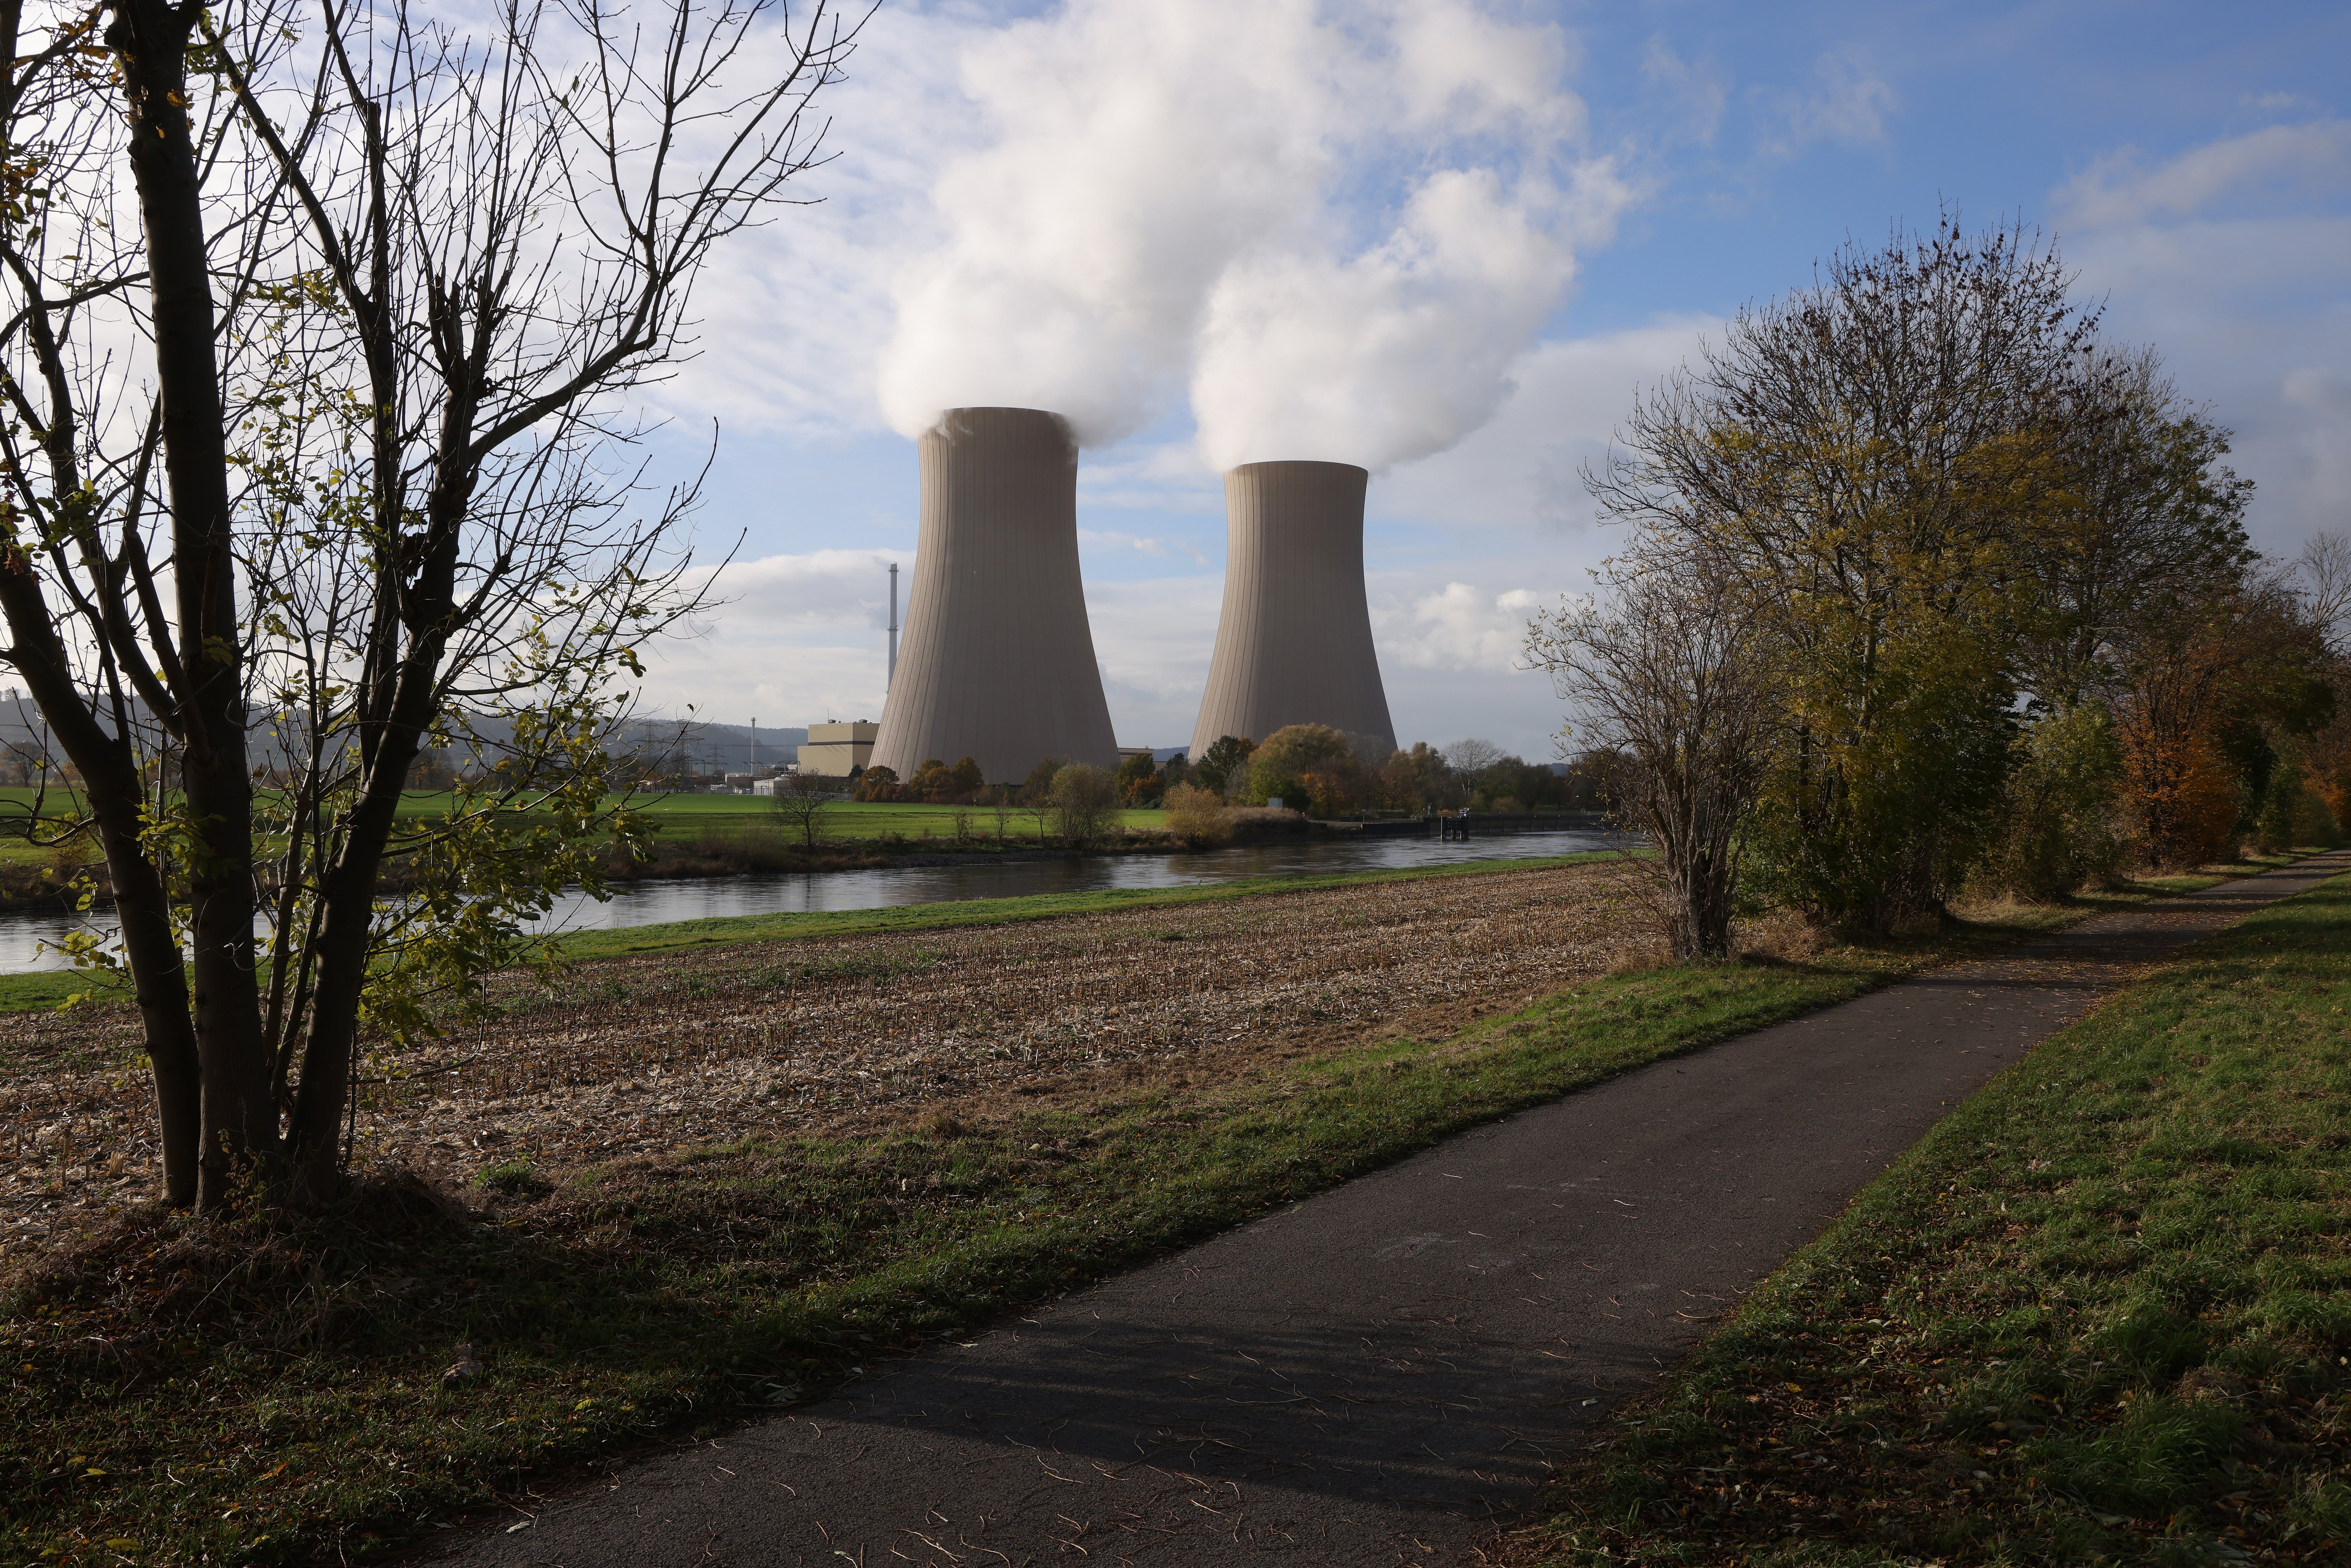 Cooling towers at the Grohnde nuclear plant in Germany